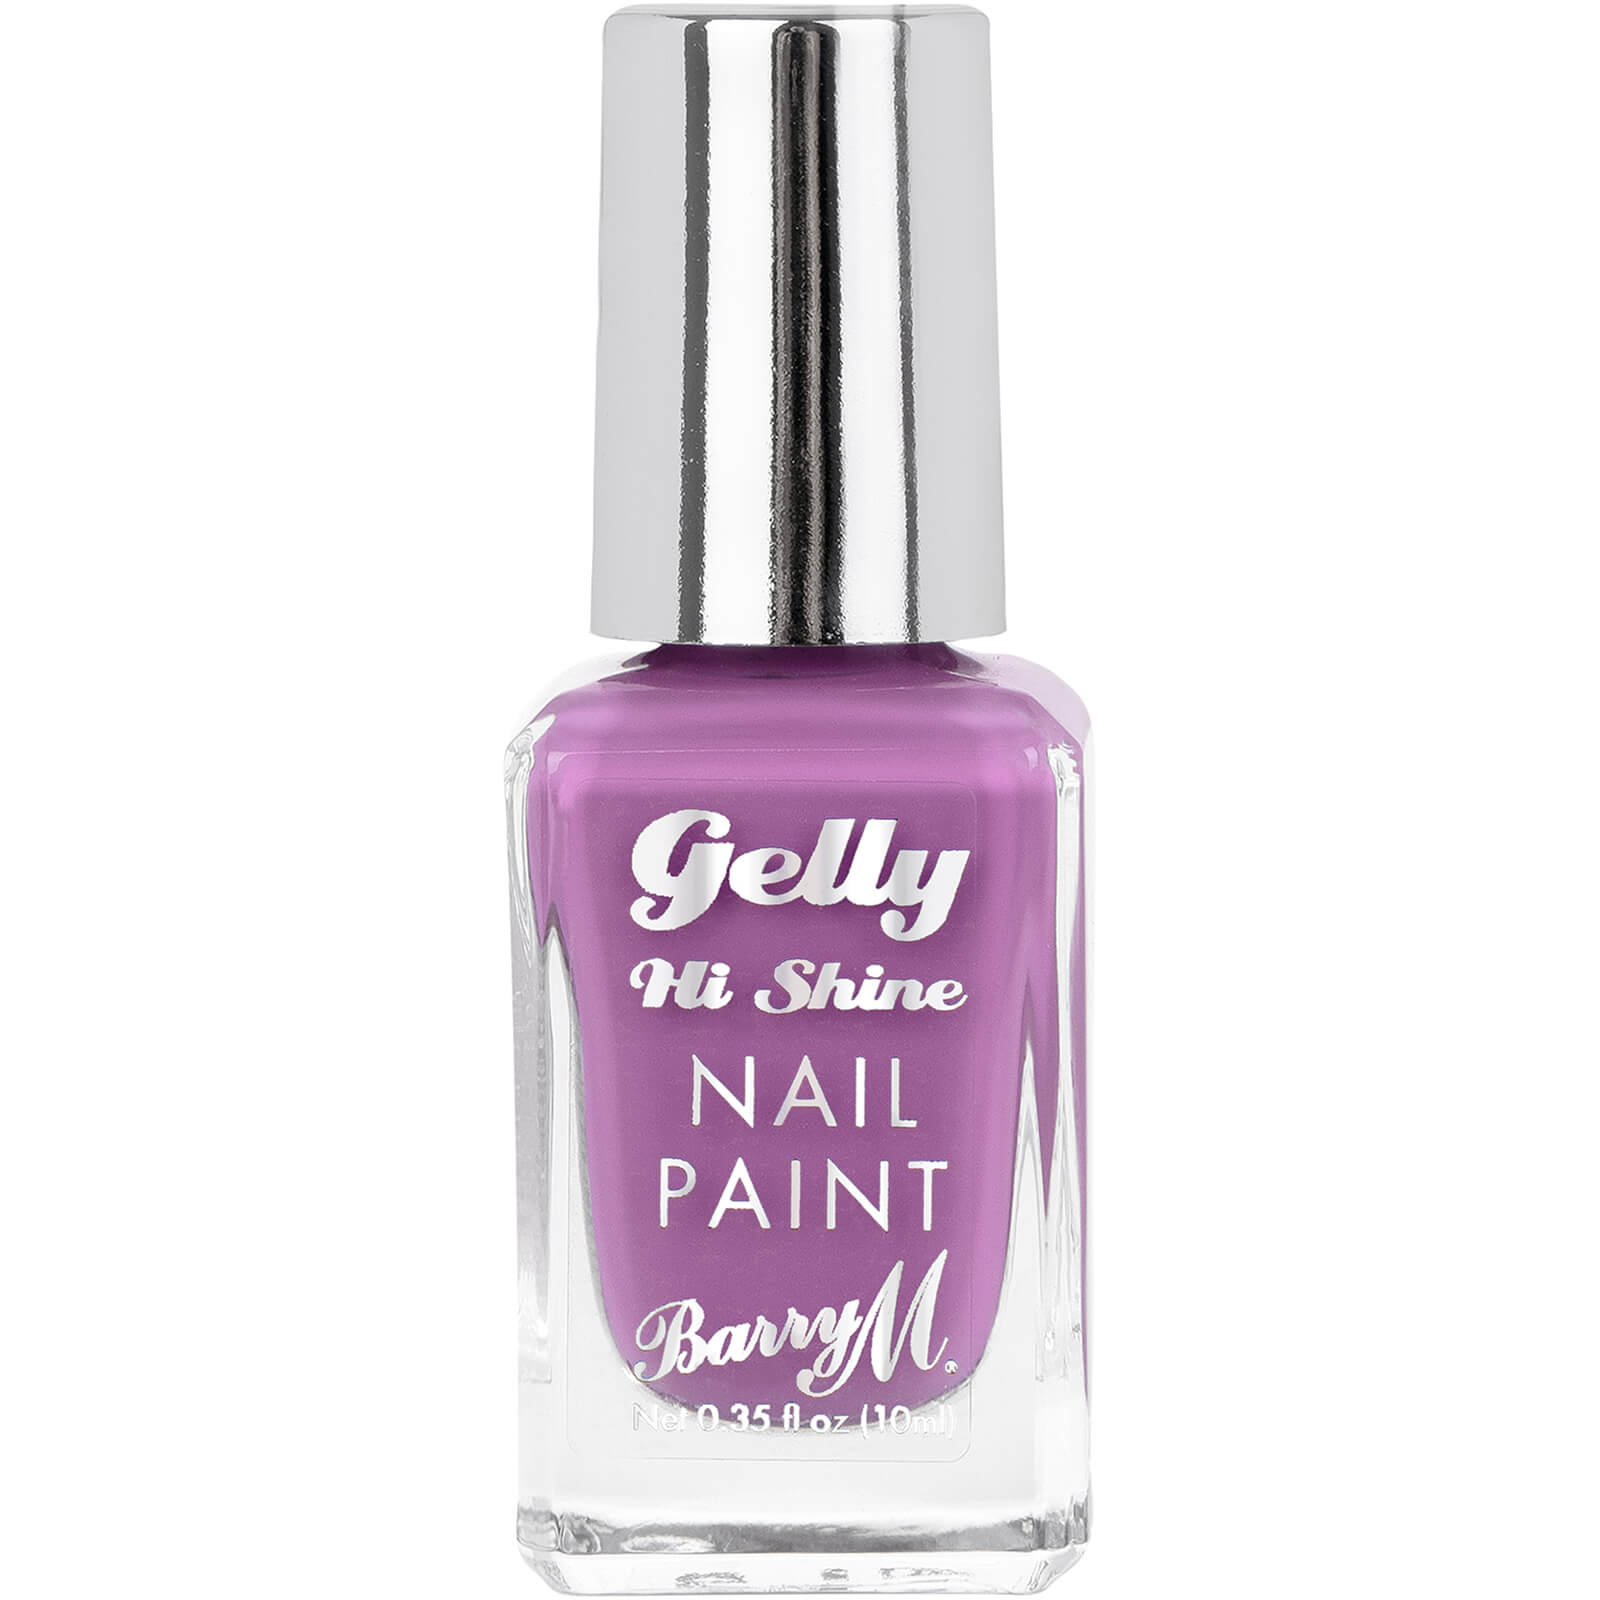 Barry M Cosmetics Gelly Hi Shine Nail Paint 10ml (Various Shades) - Orchid